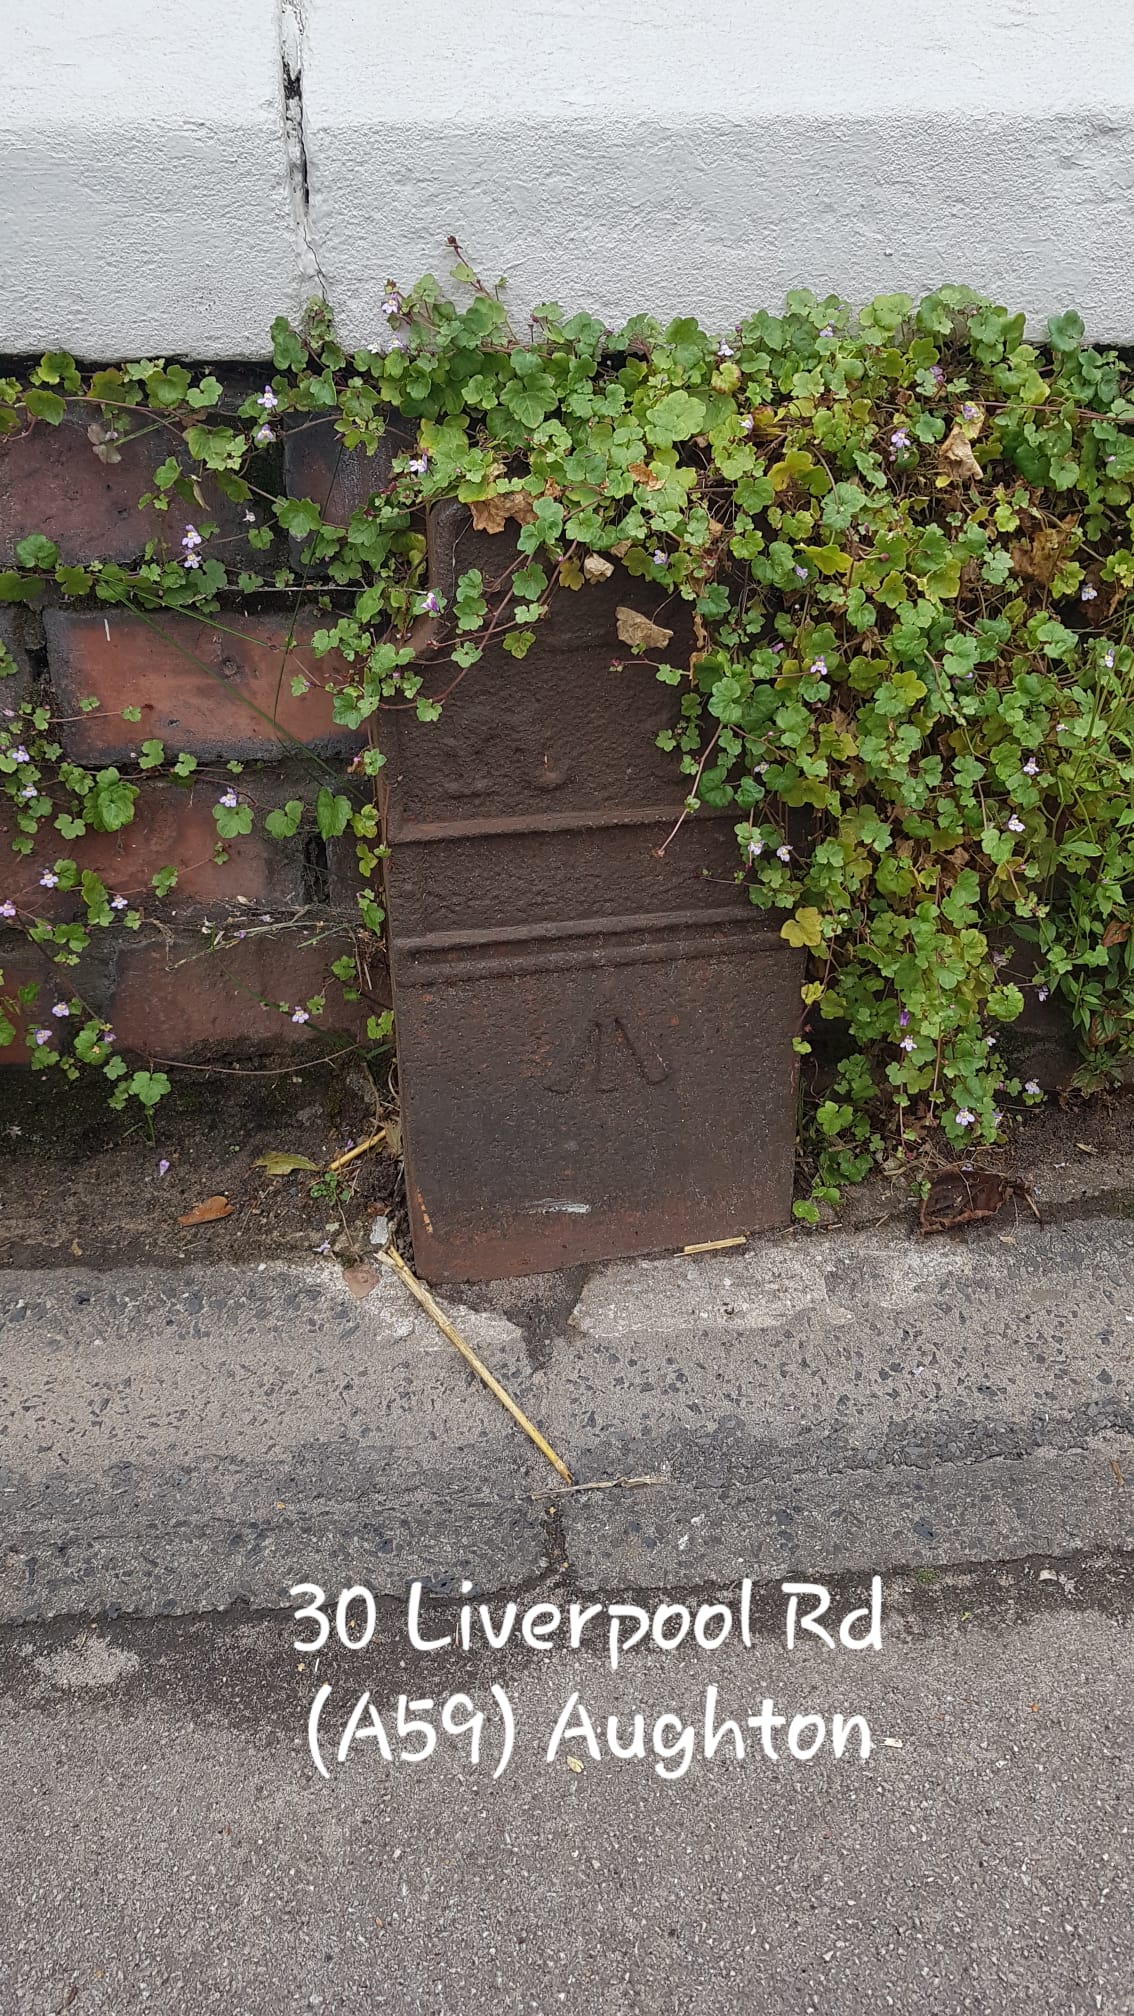 Telegraph cable marker post at 30 Liverpool Road, Aughton, Ormskirk by Jan Gibbons 